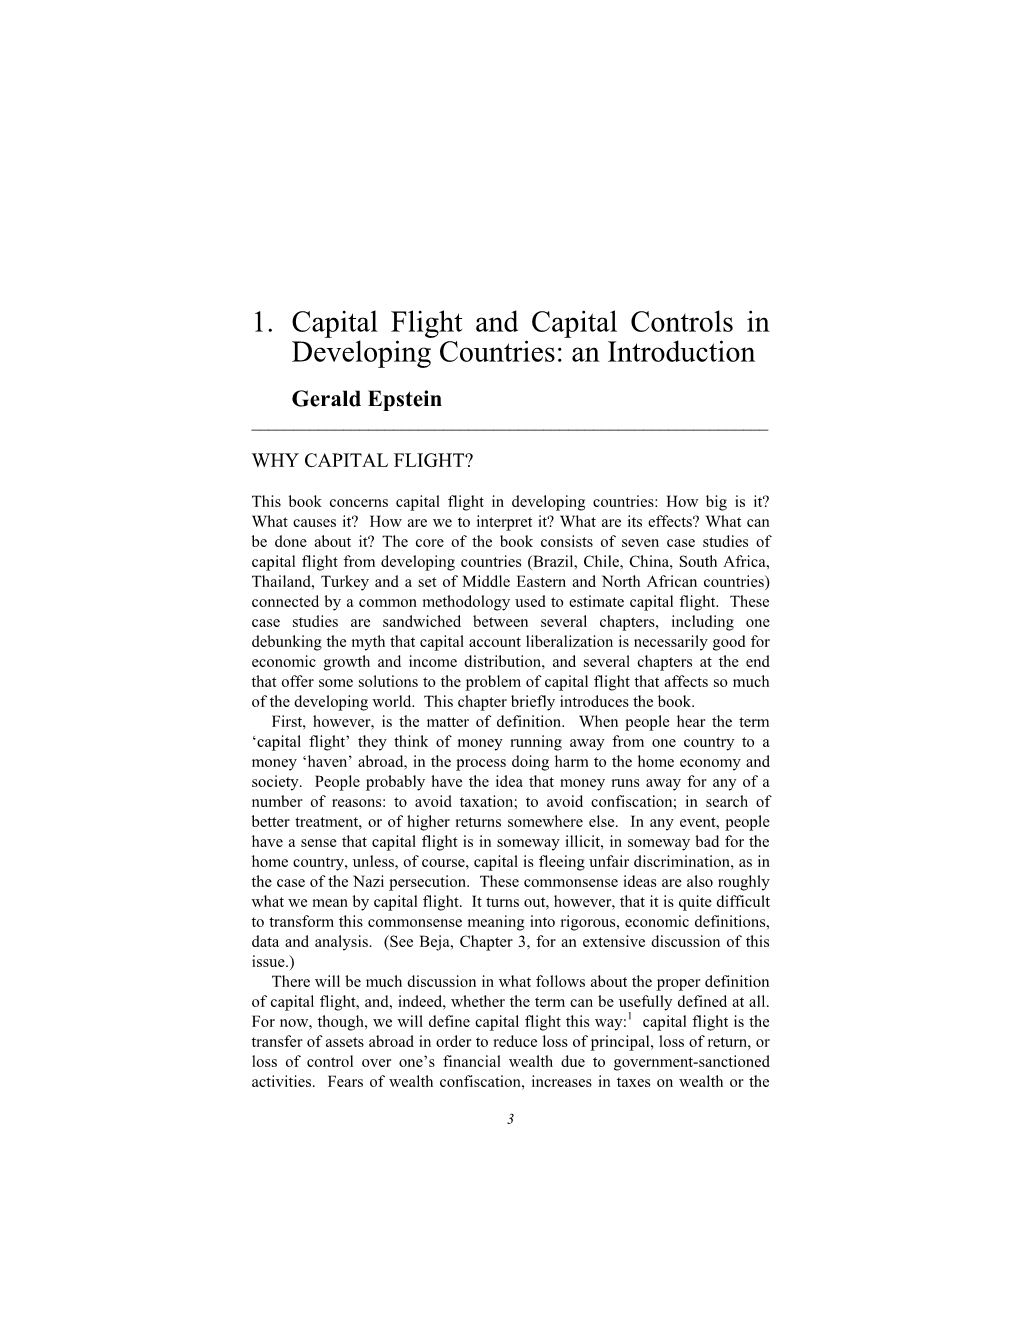 1. Capital Flight and Capital Controls in Developing Countries: an Introduction